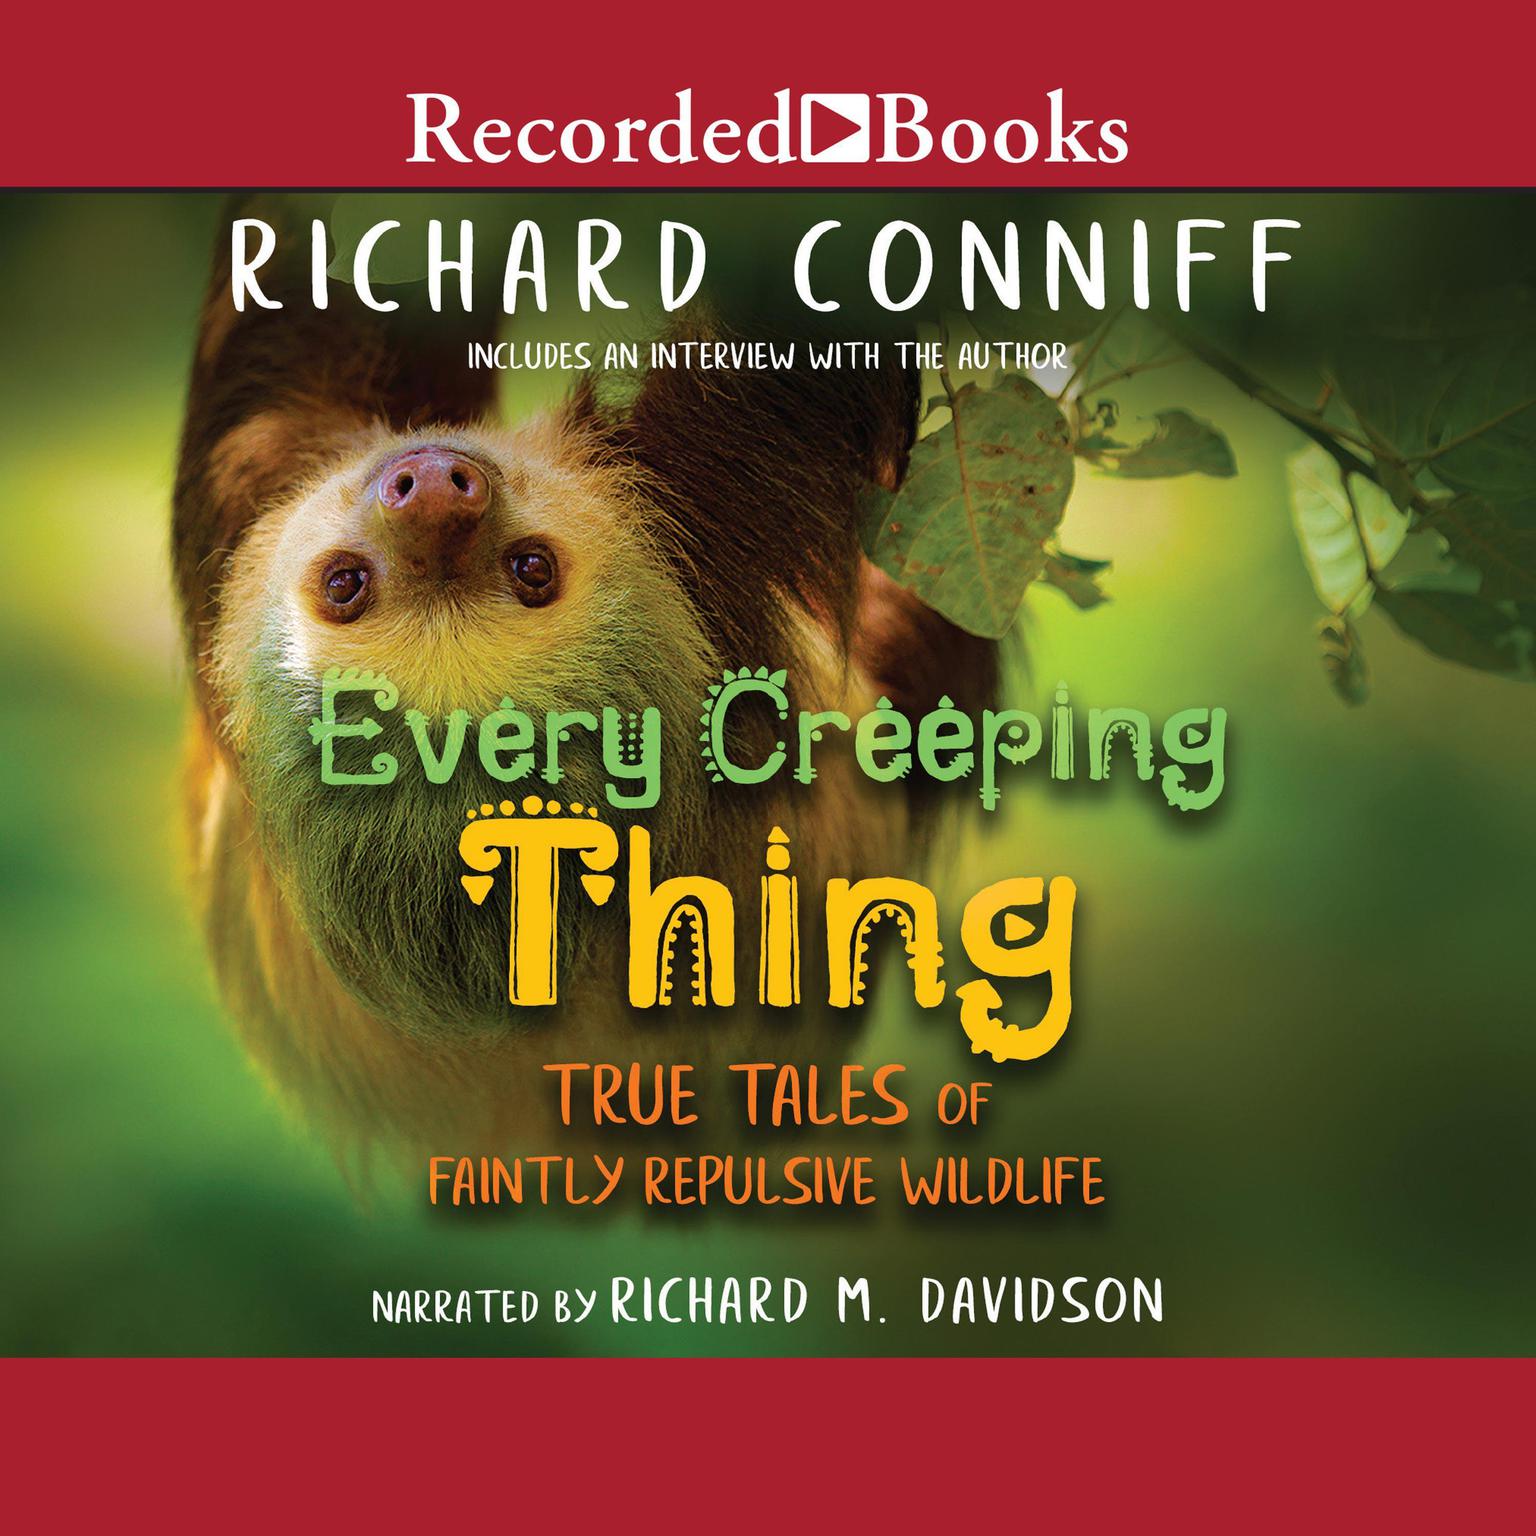 Every Creeping Thing: True Tales of Faintly Repulsive Wildlife Audiobook, by Richard Conniff